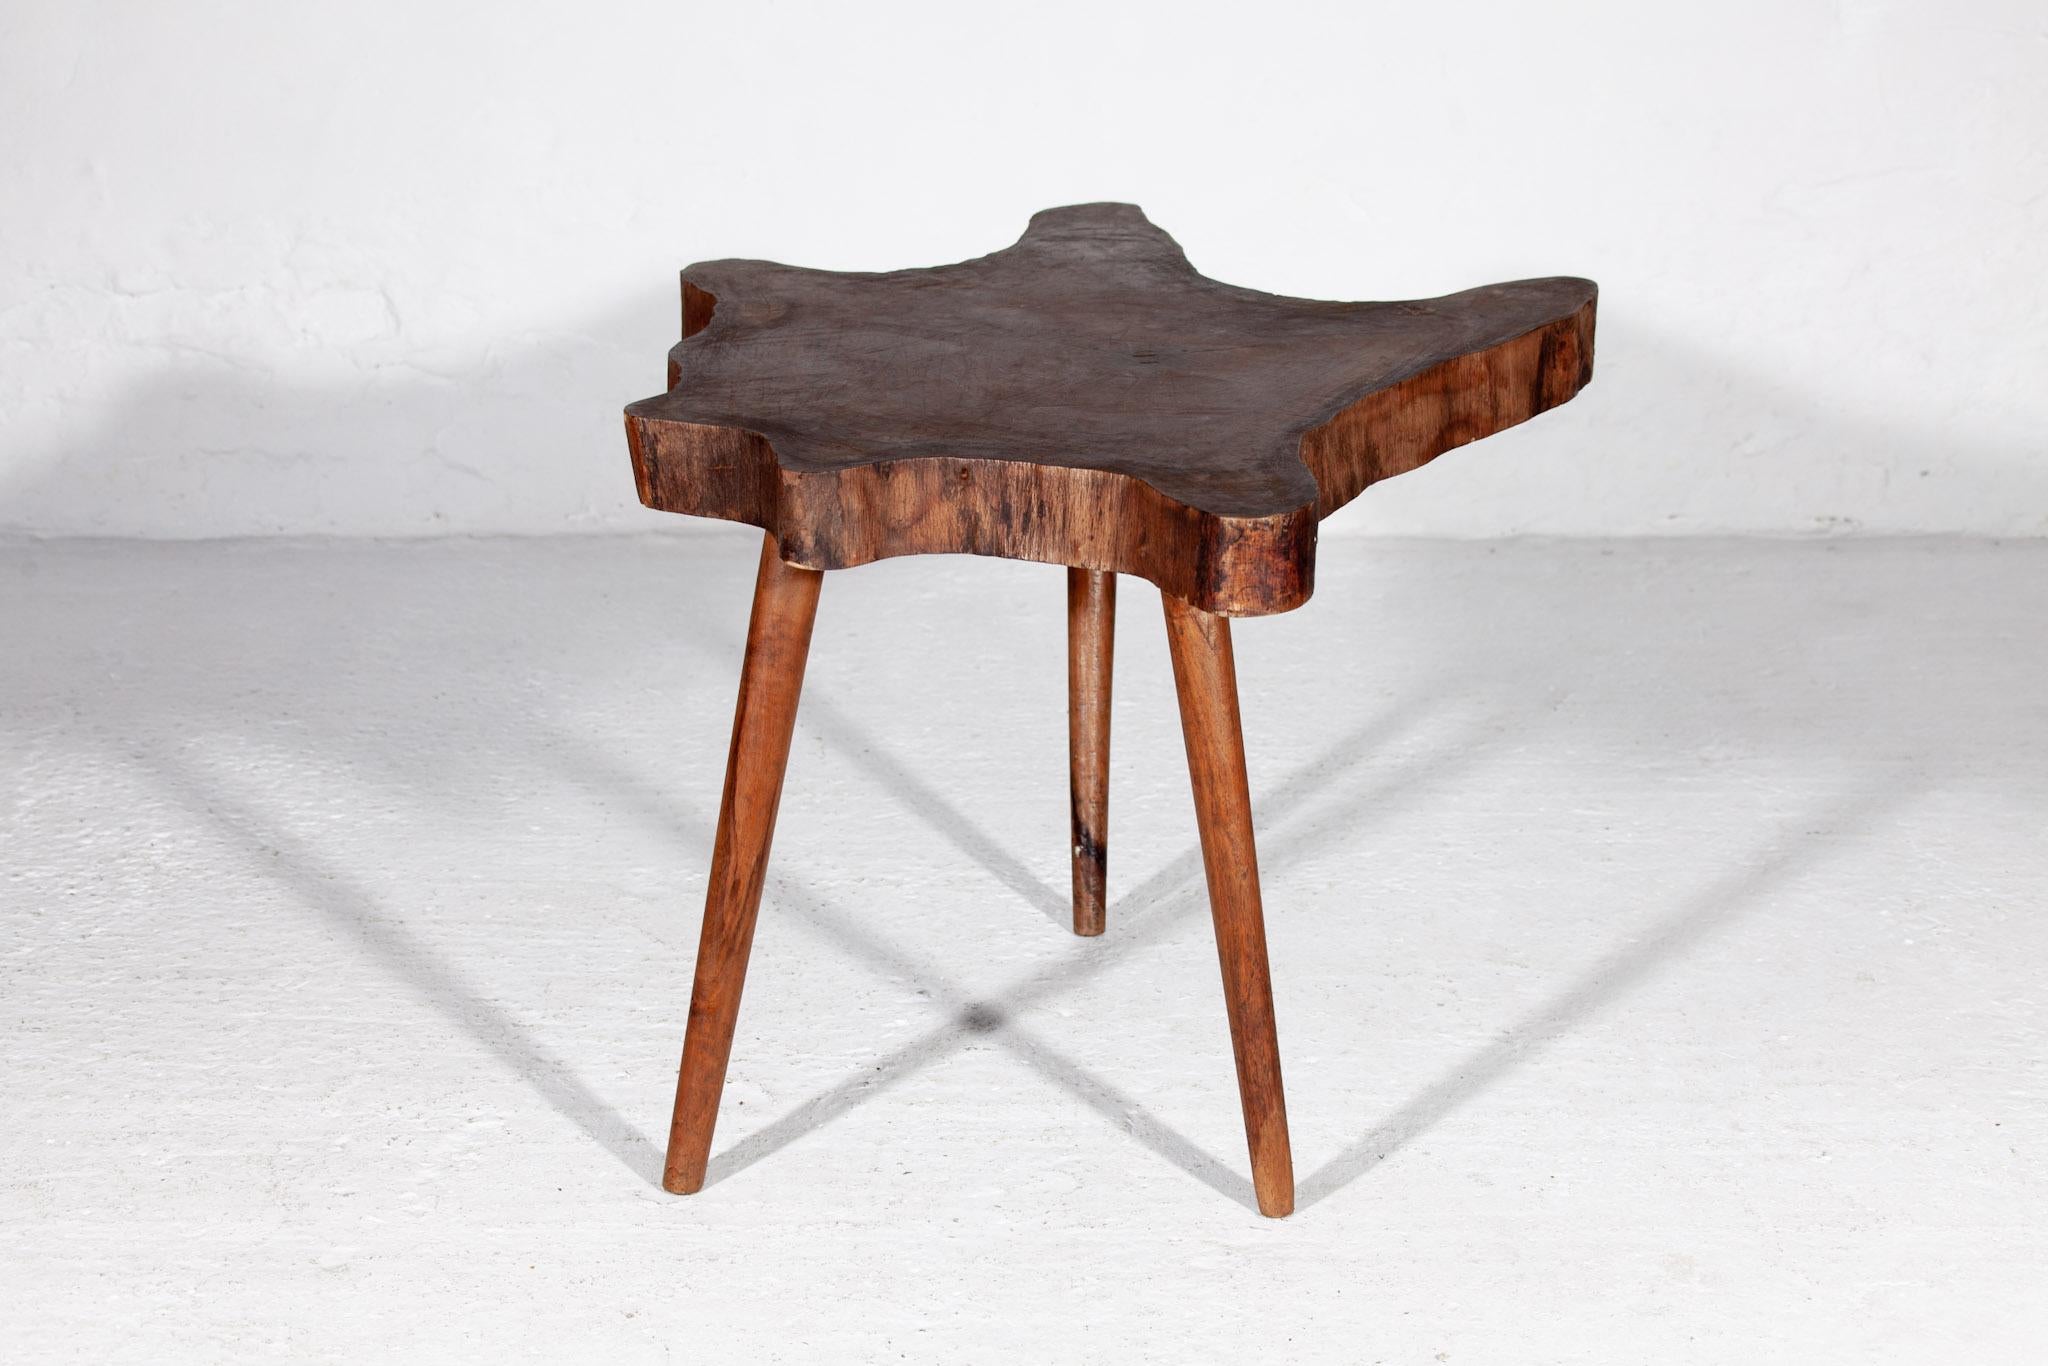 Hand-Crafted Brutalist Solid Amorphic Teak Wood Natural Slab Coffee Side Table, 1930s For Sale